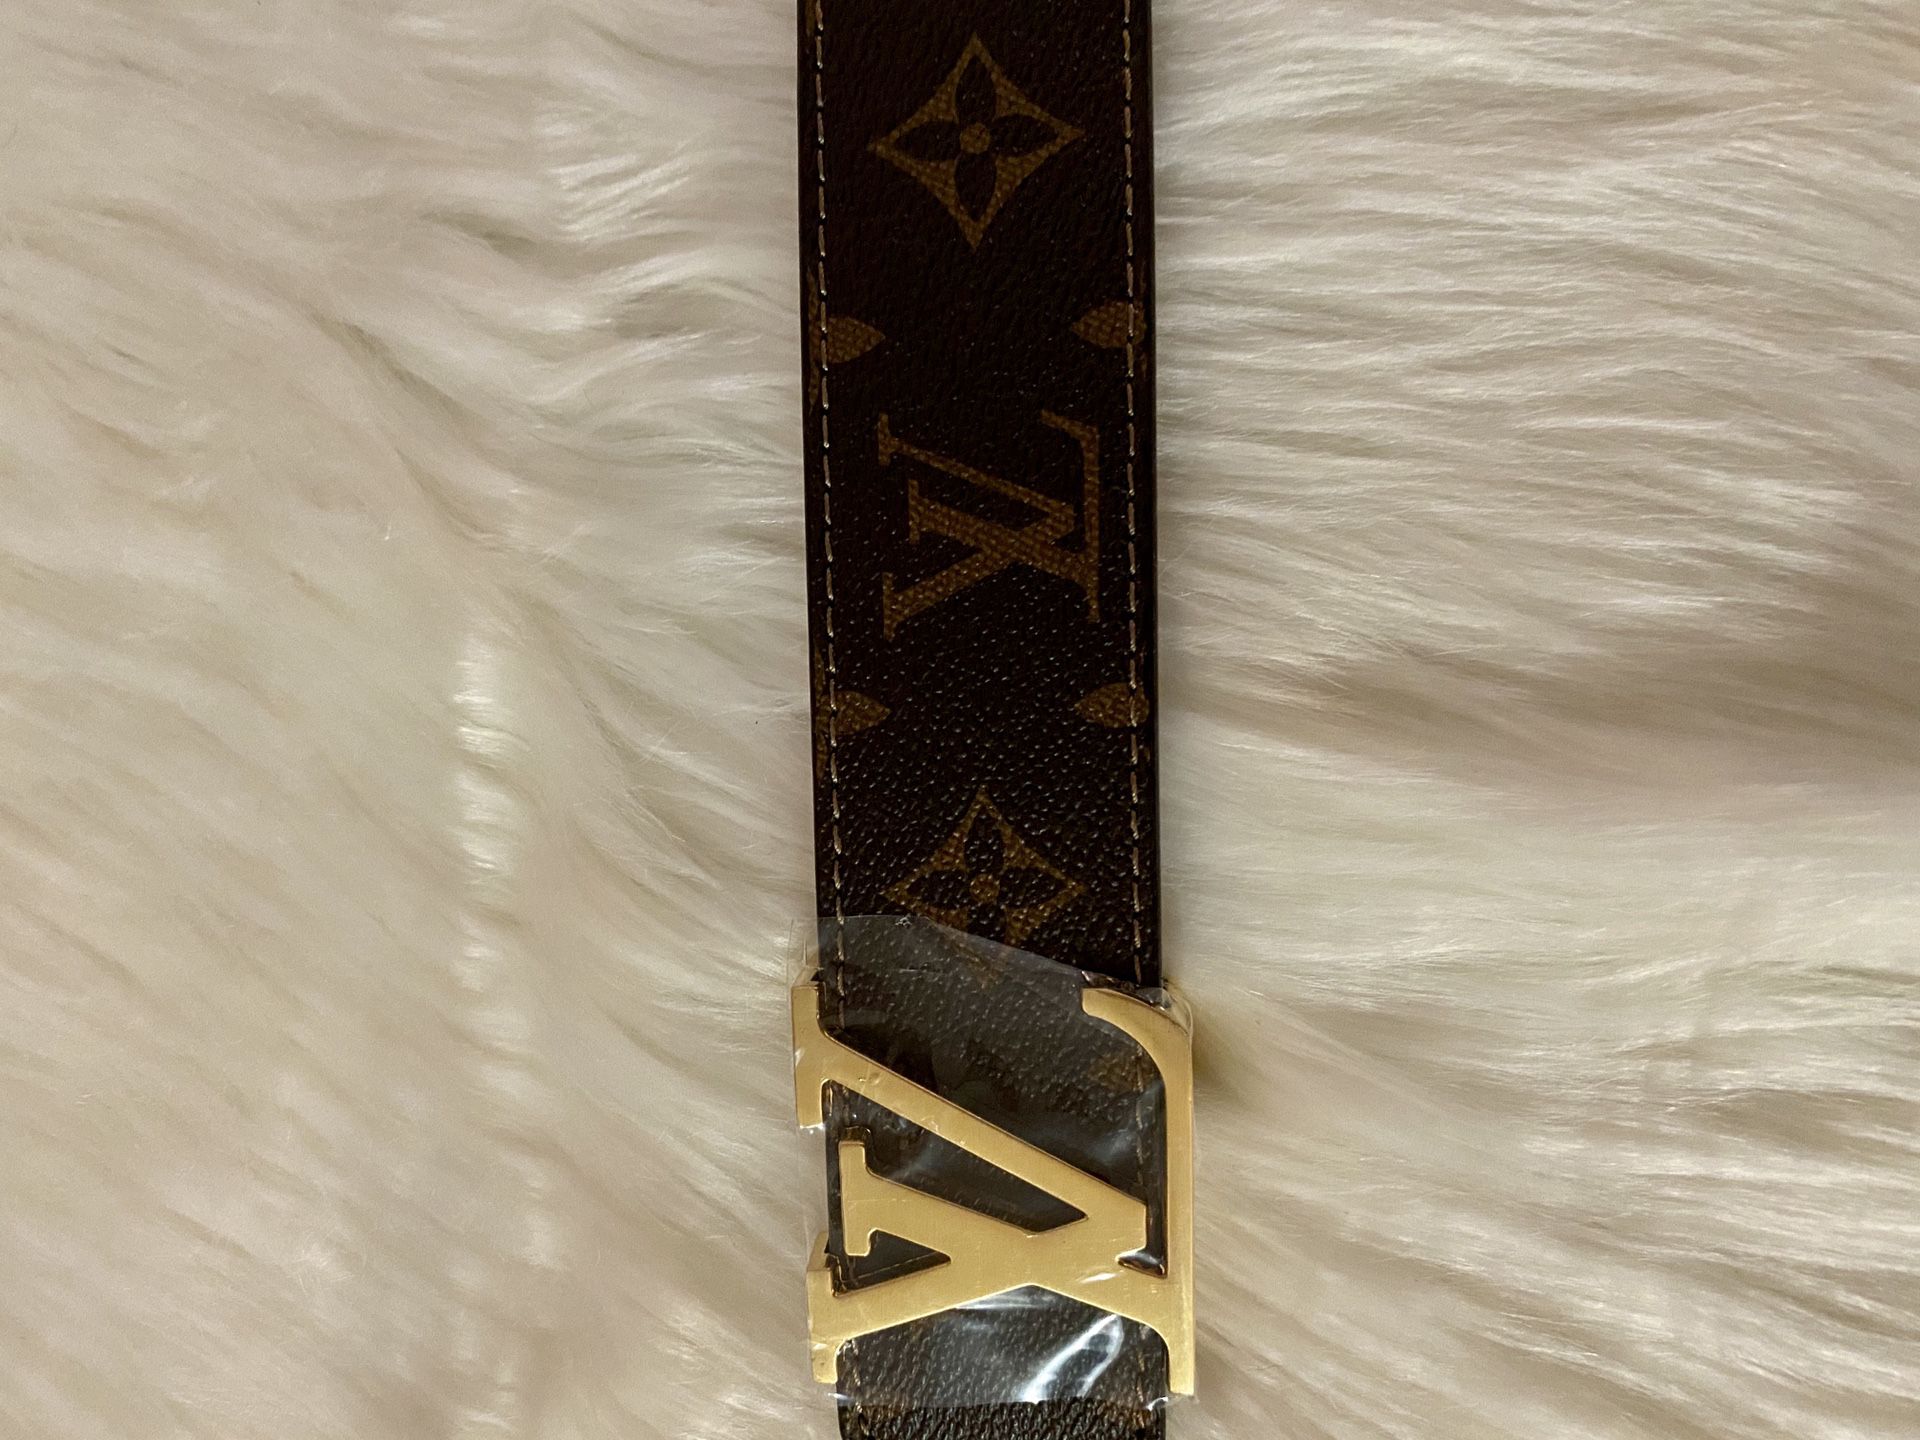 Brown belt with gold buckle